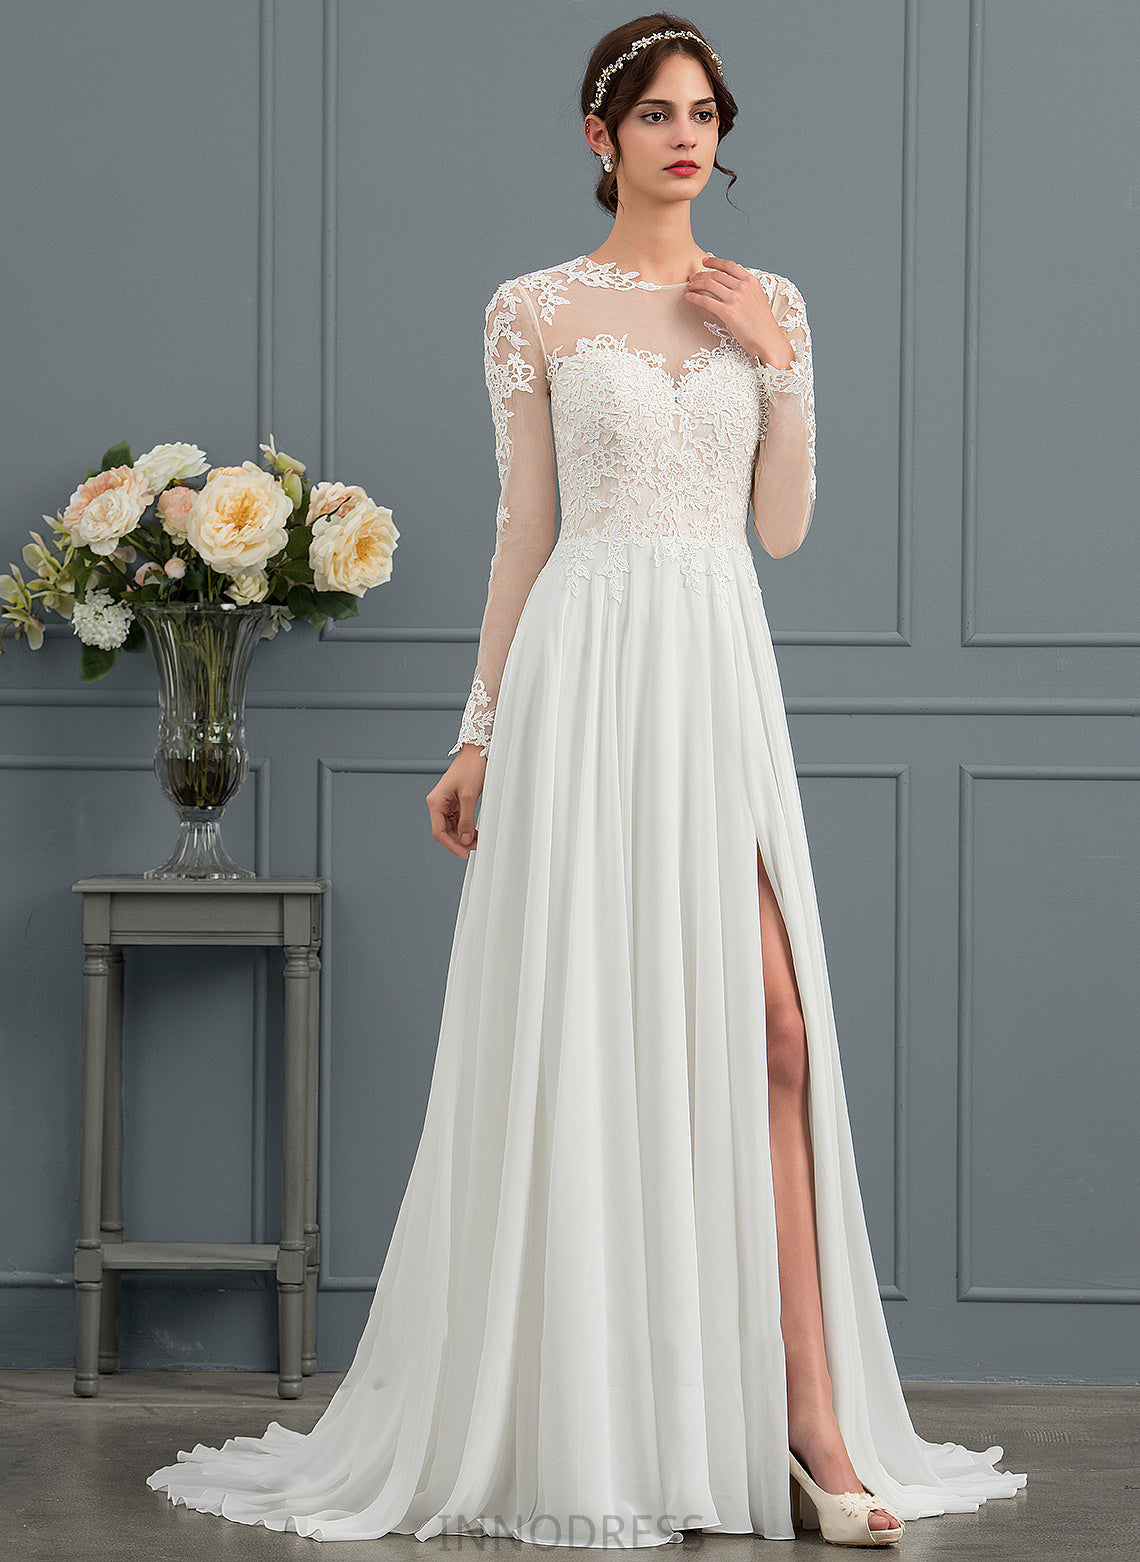 Wedding Dresses Appliques With Train A-Line Chiffon Illusion Dress Split Front Wedding Lace Finley Sweep